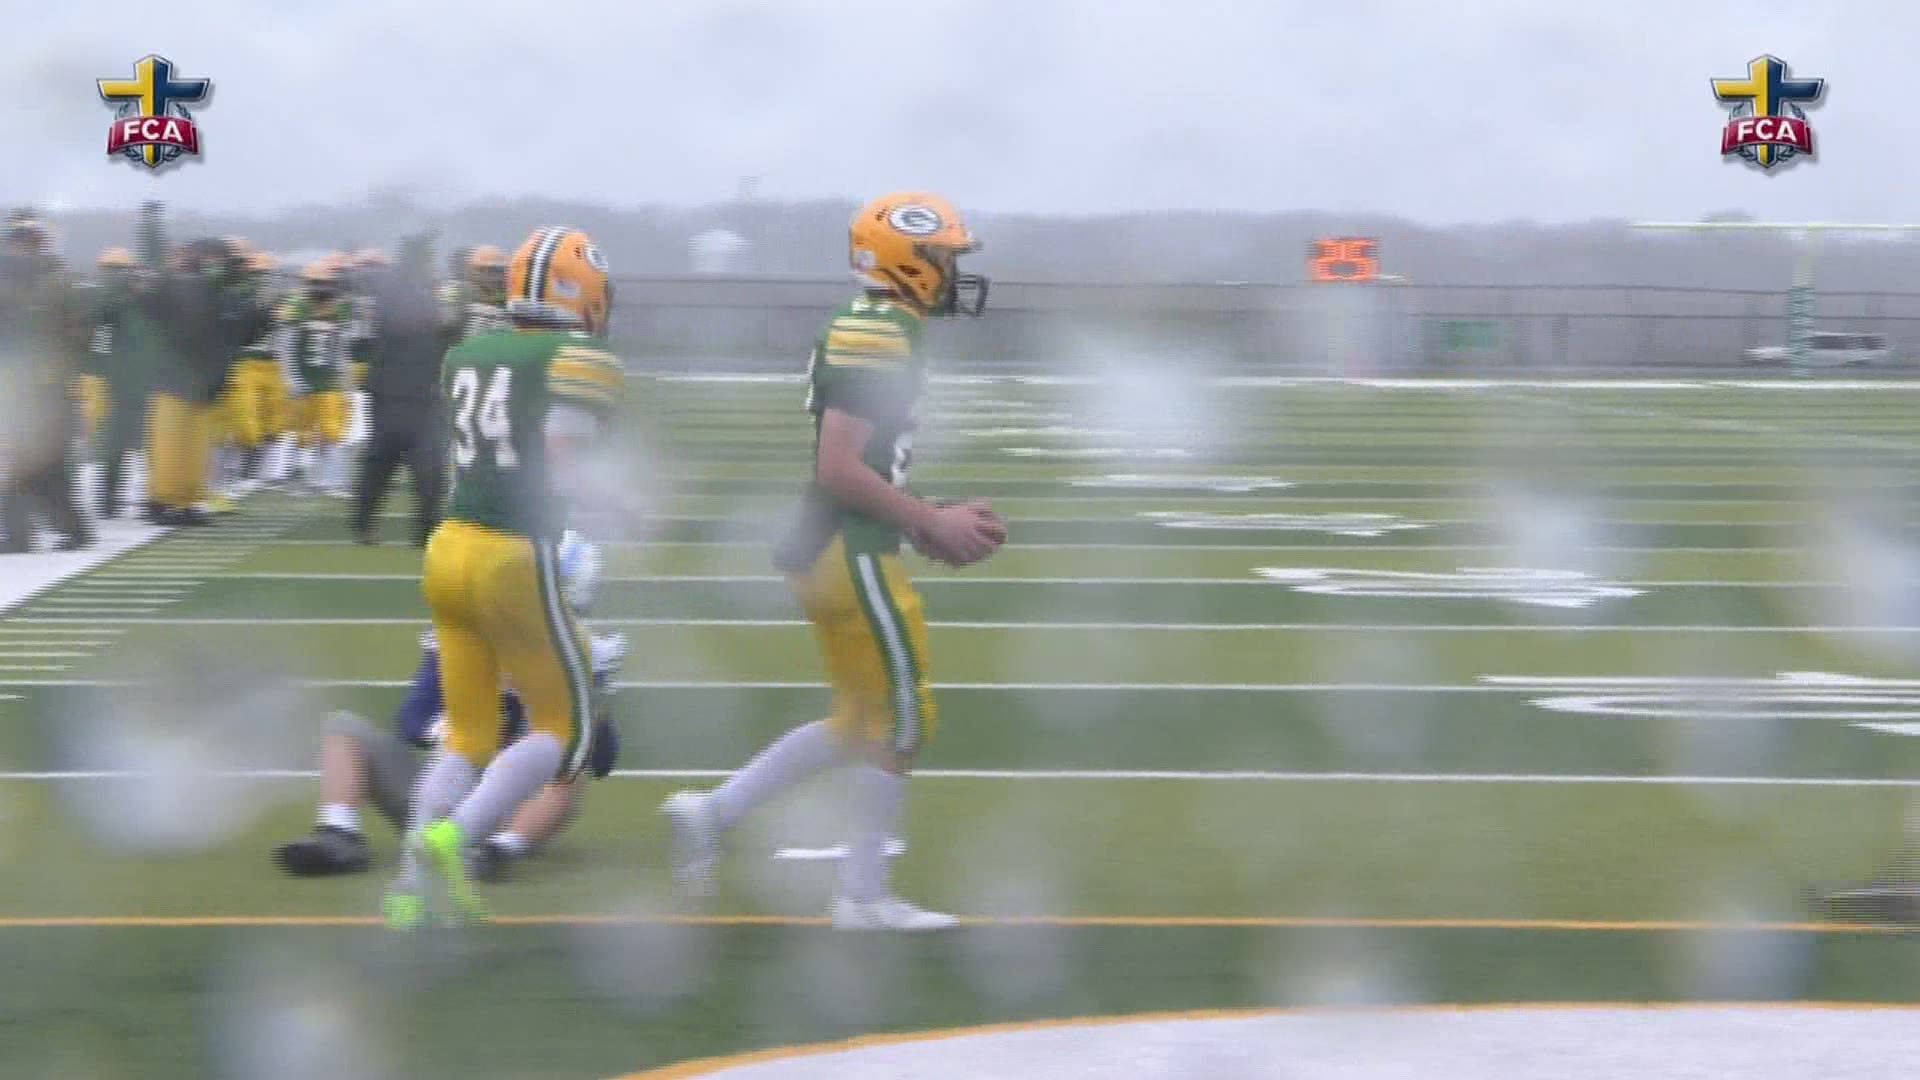 Geneseo would take advantage of some bad weather conditions and Quincy mistakes to roll to a big win.